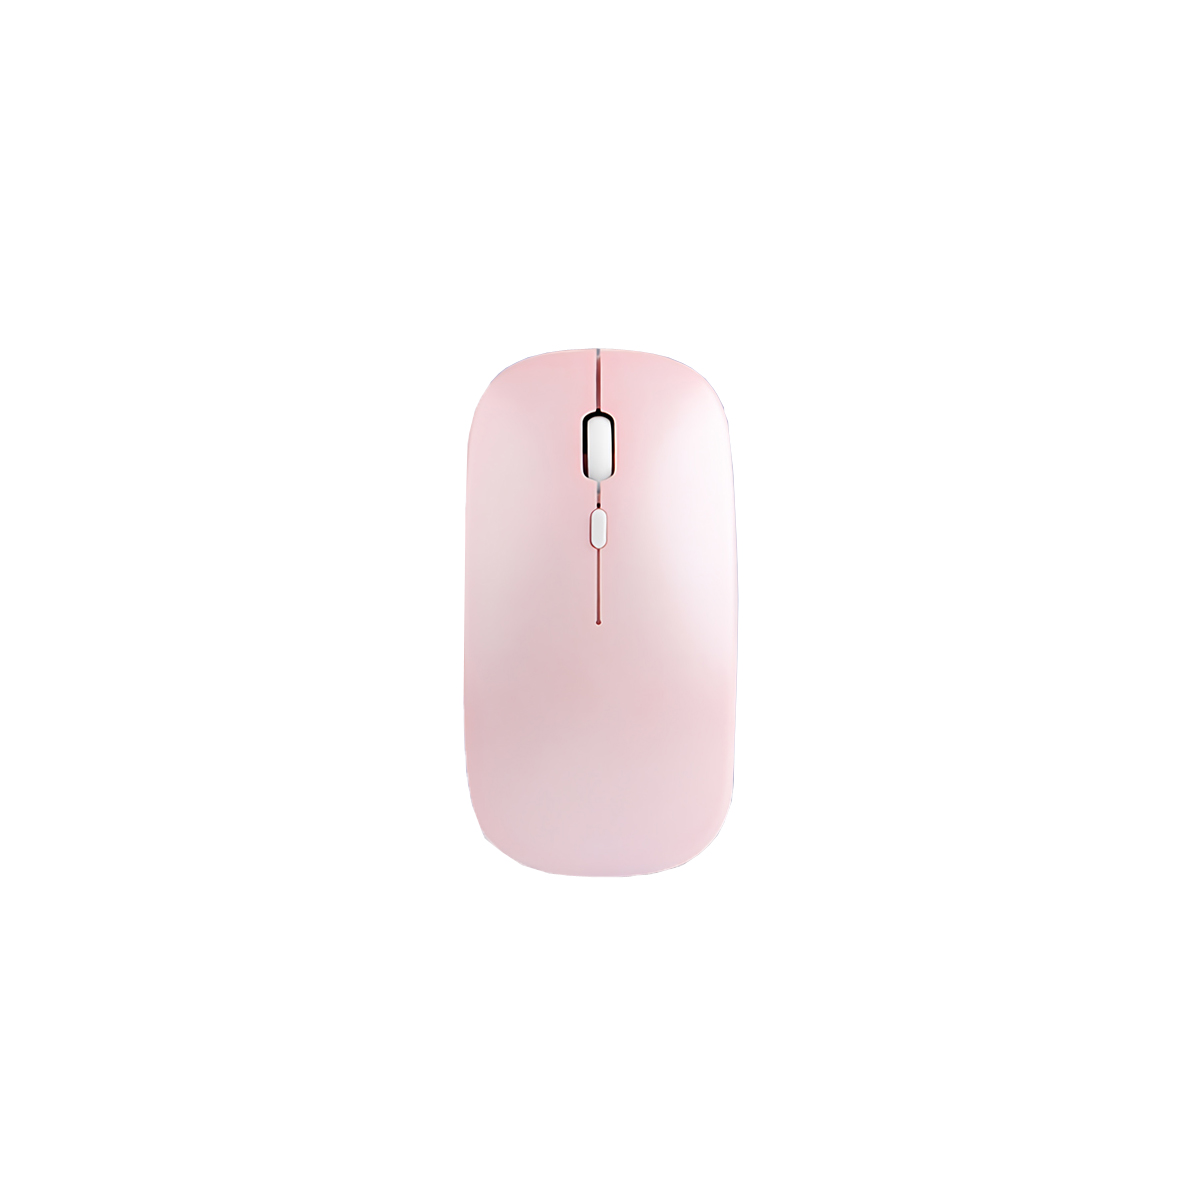 Find Dual Mode Rechargeable Mouse 2.4GHz Wired 1600DPI Silent Macarone Mute Mice for Laptop PC for Sale on Gipsybee.com with cryptocurrencies